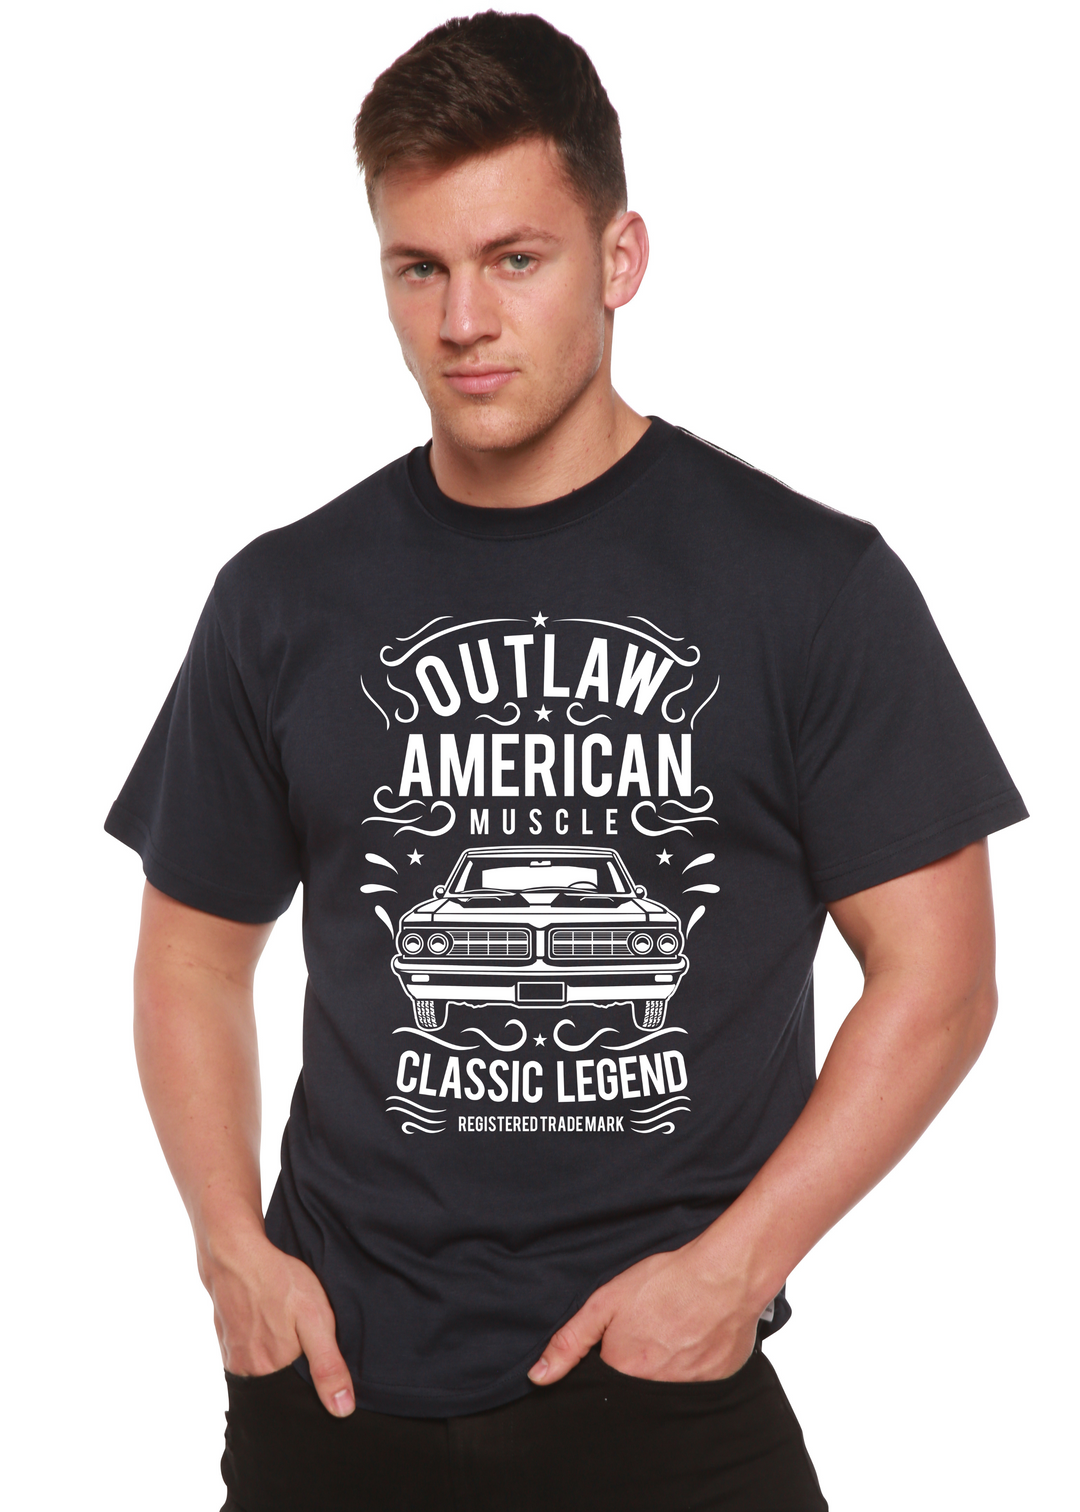 Outlaw American Muscle men's bamboo tshirt navy blue